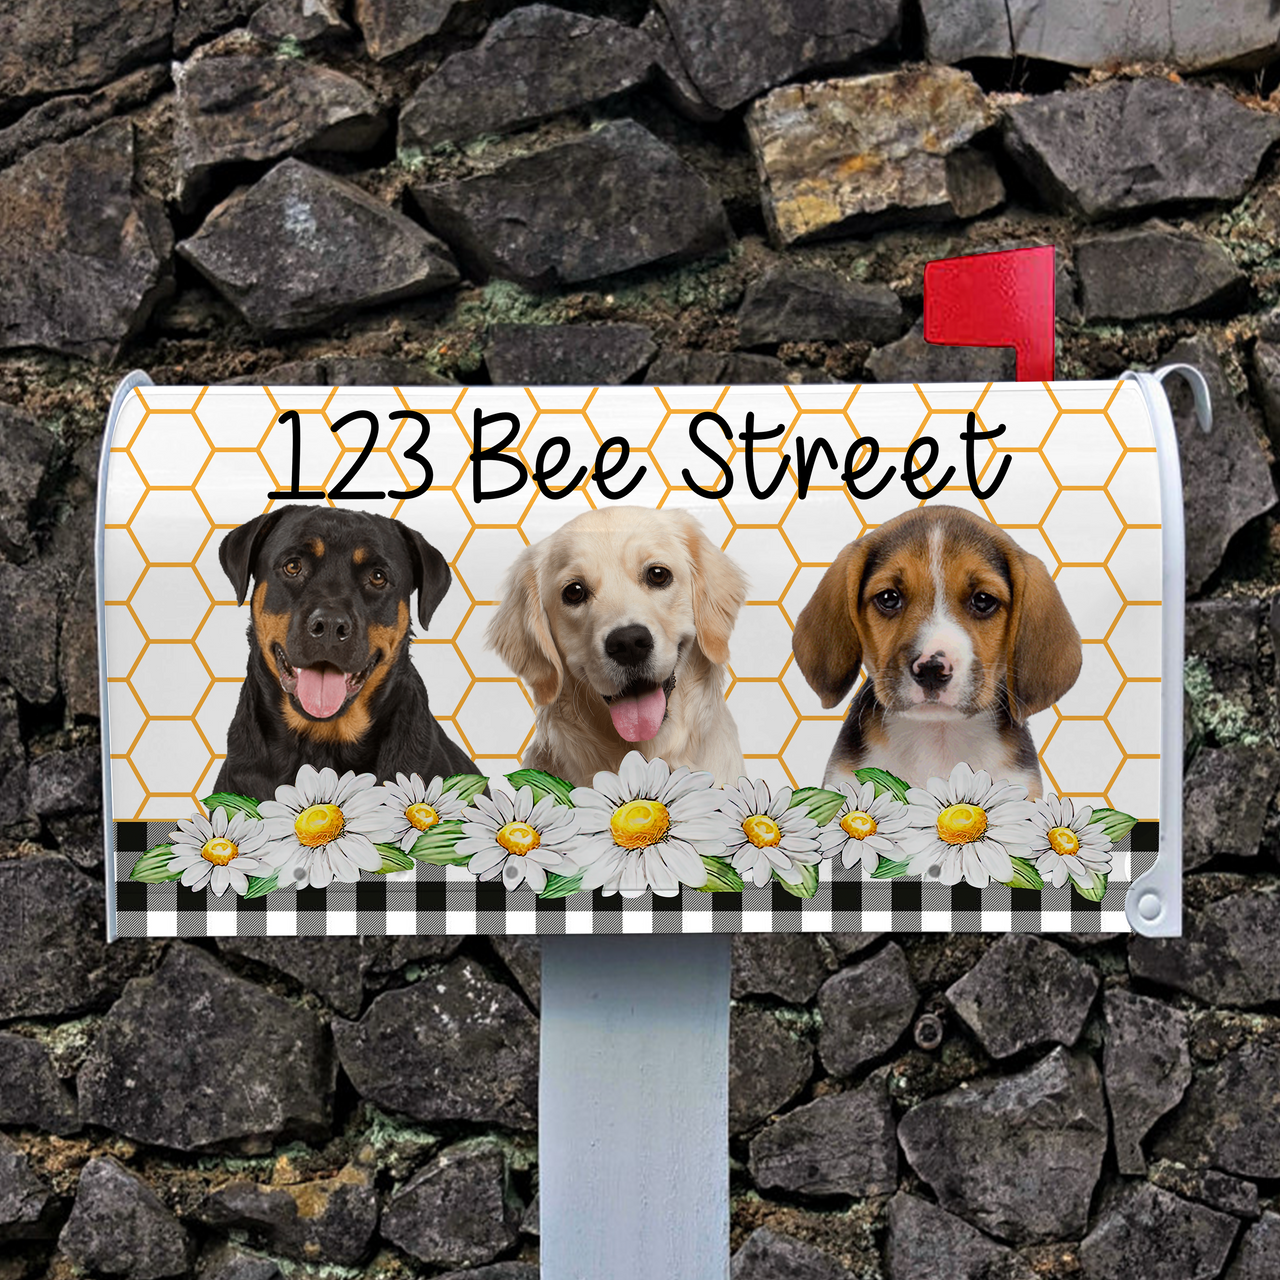 Custom Dog Cat Photos Welcome To Our Home Mailbox Cover, Pet Lover Gift AF